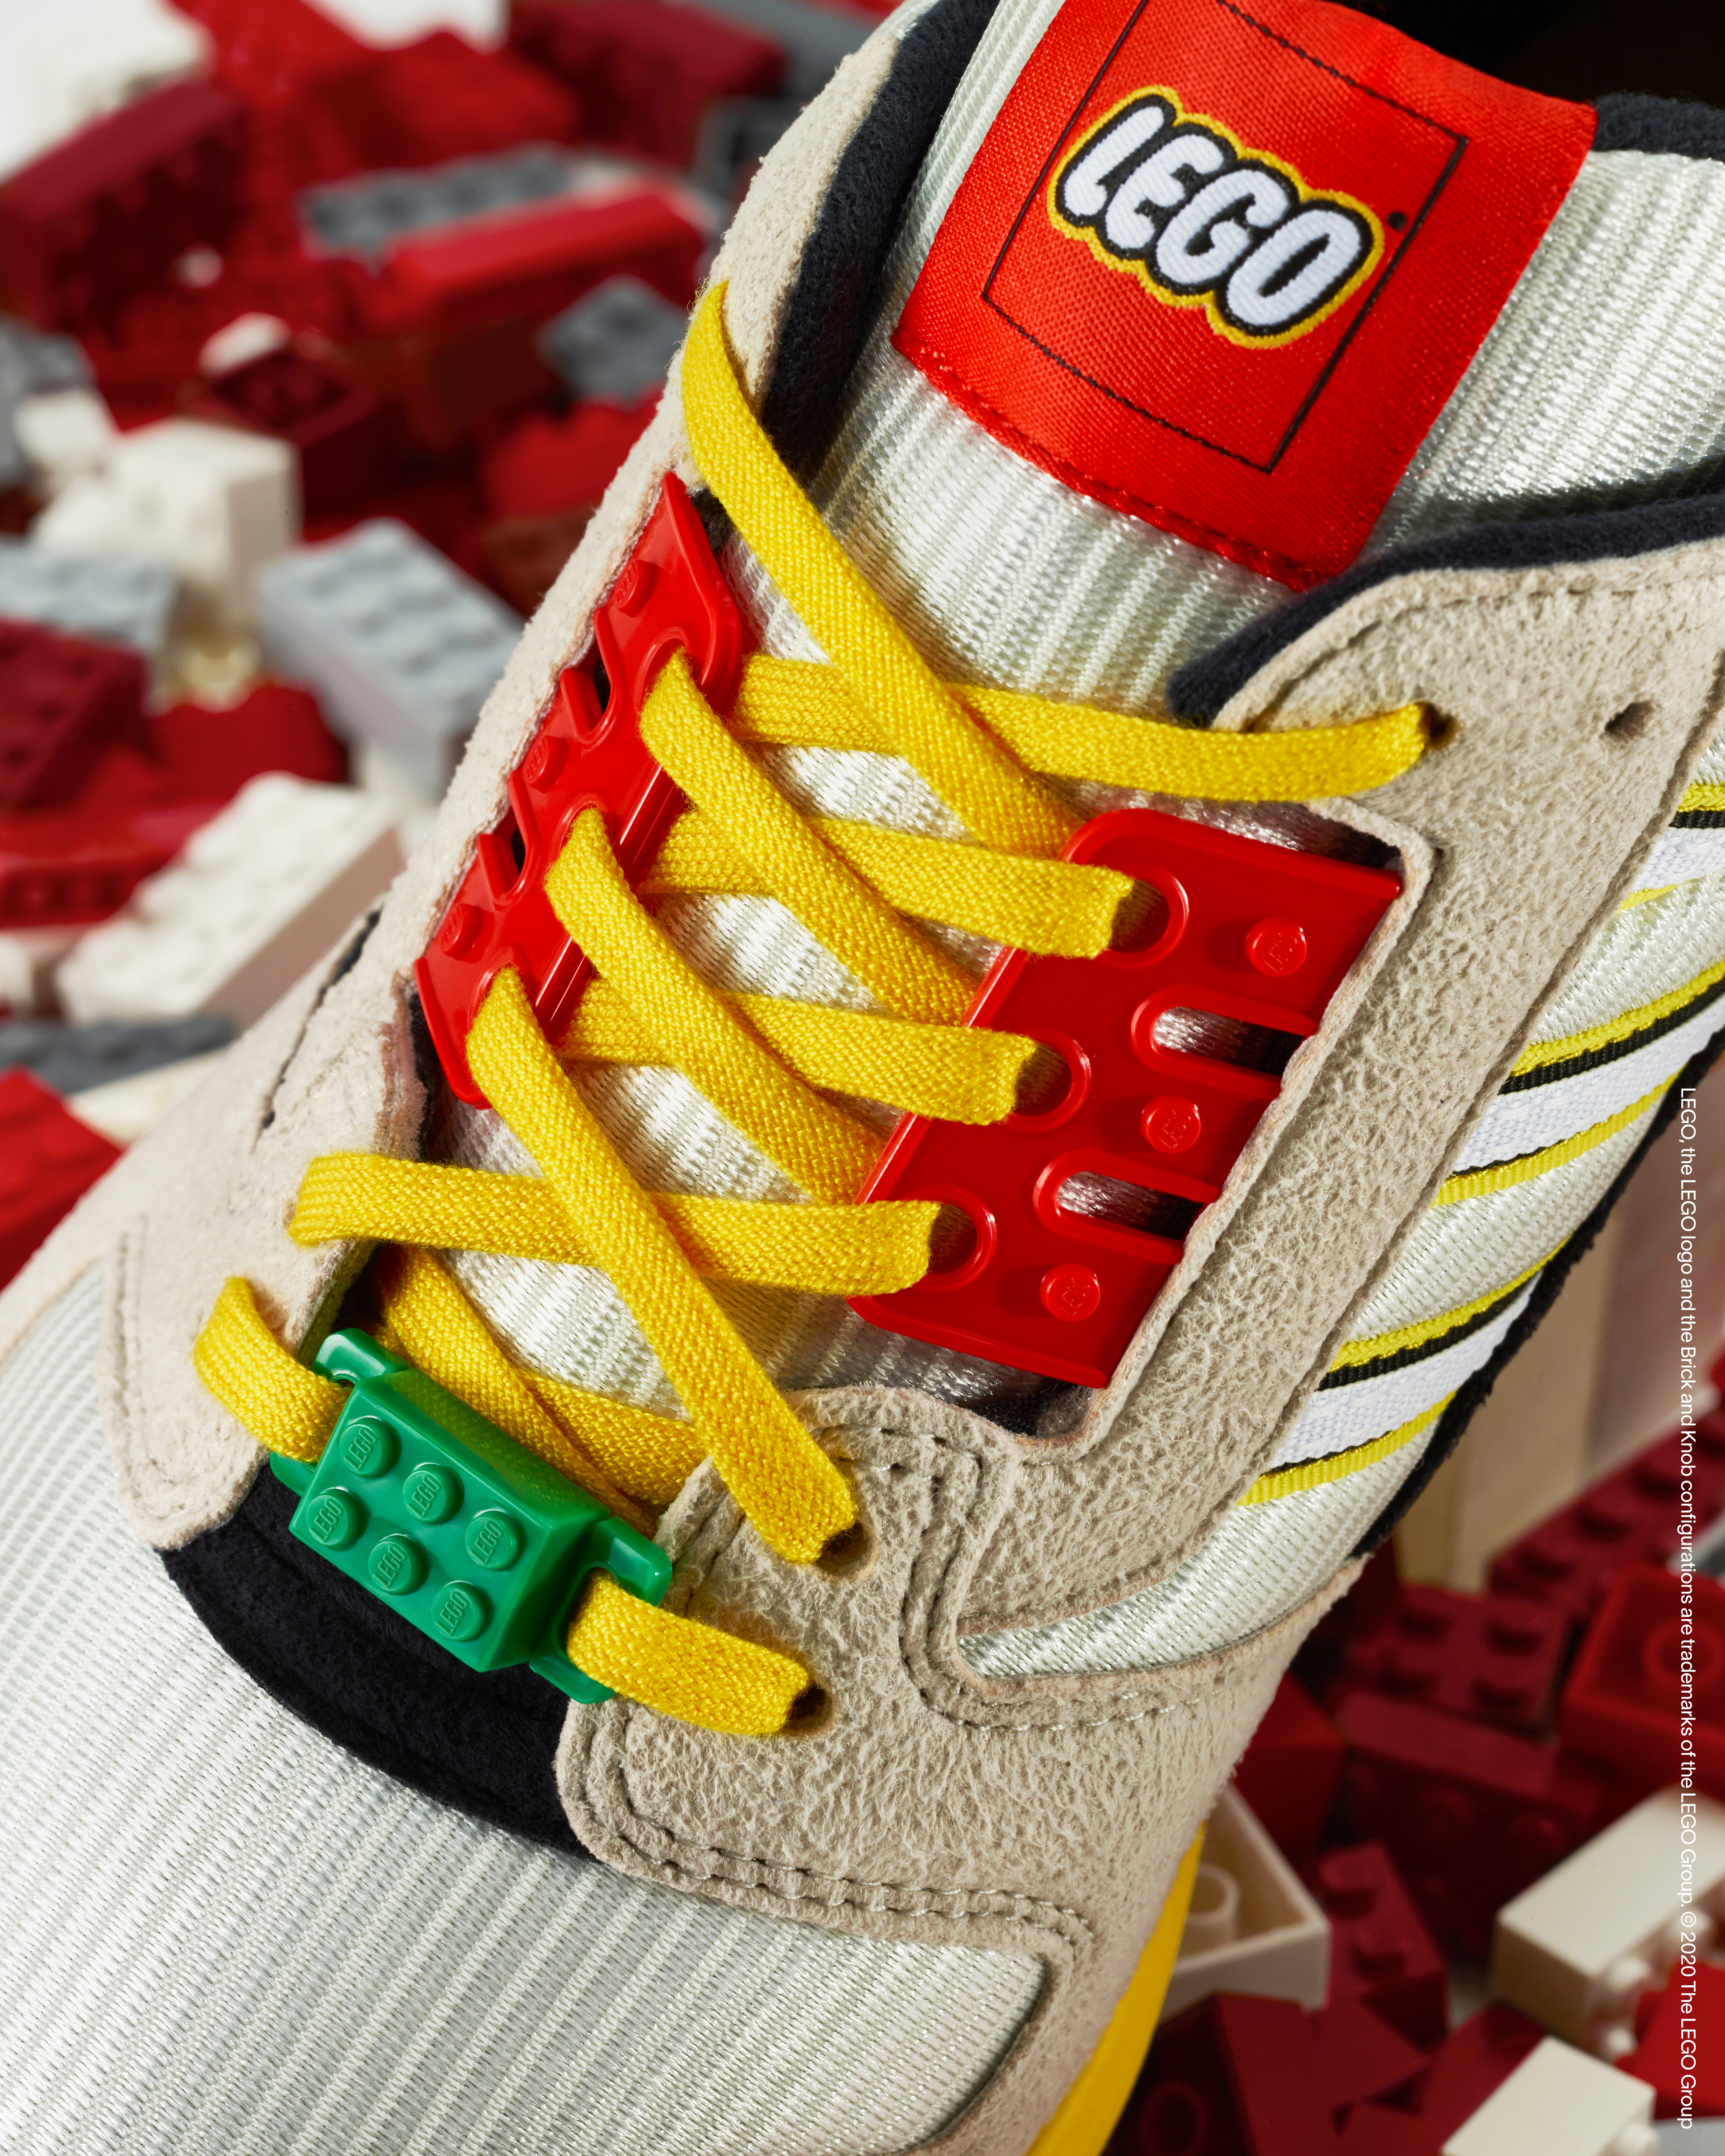 adidas lego shoes release date